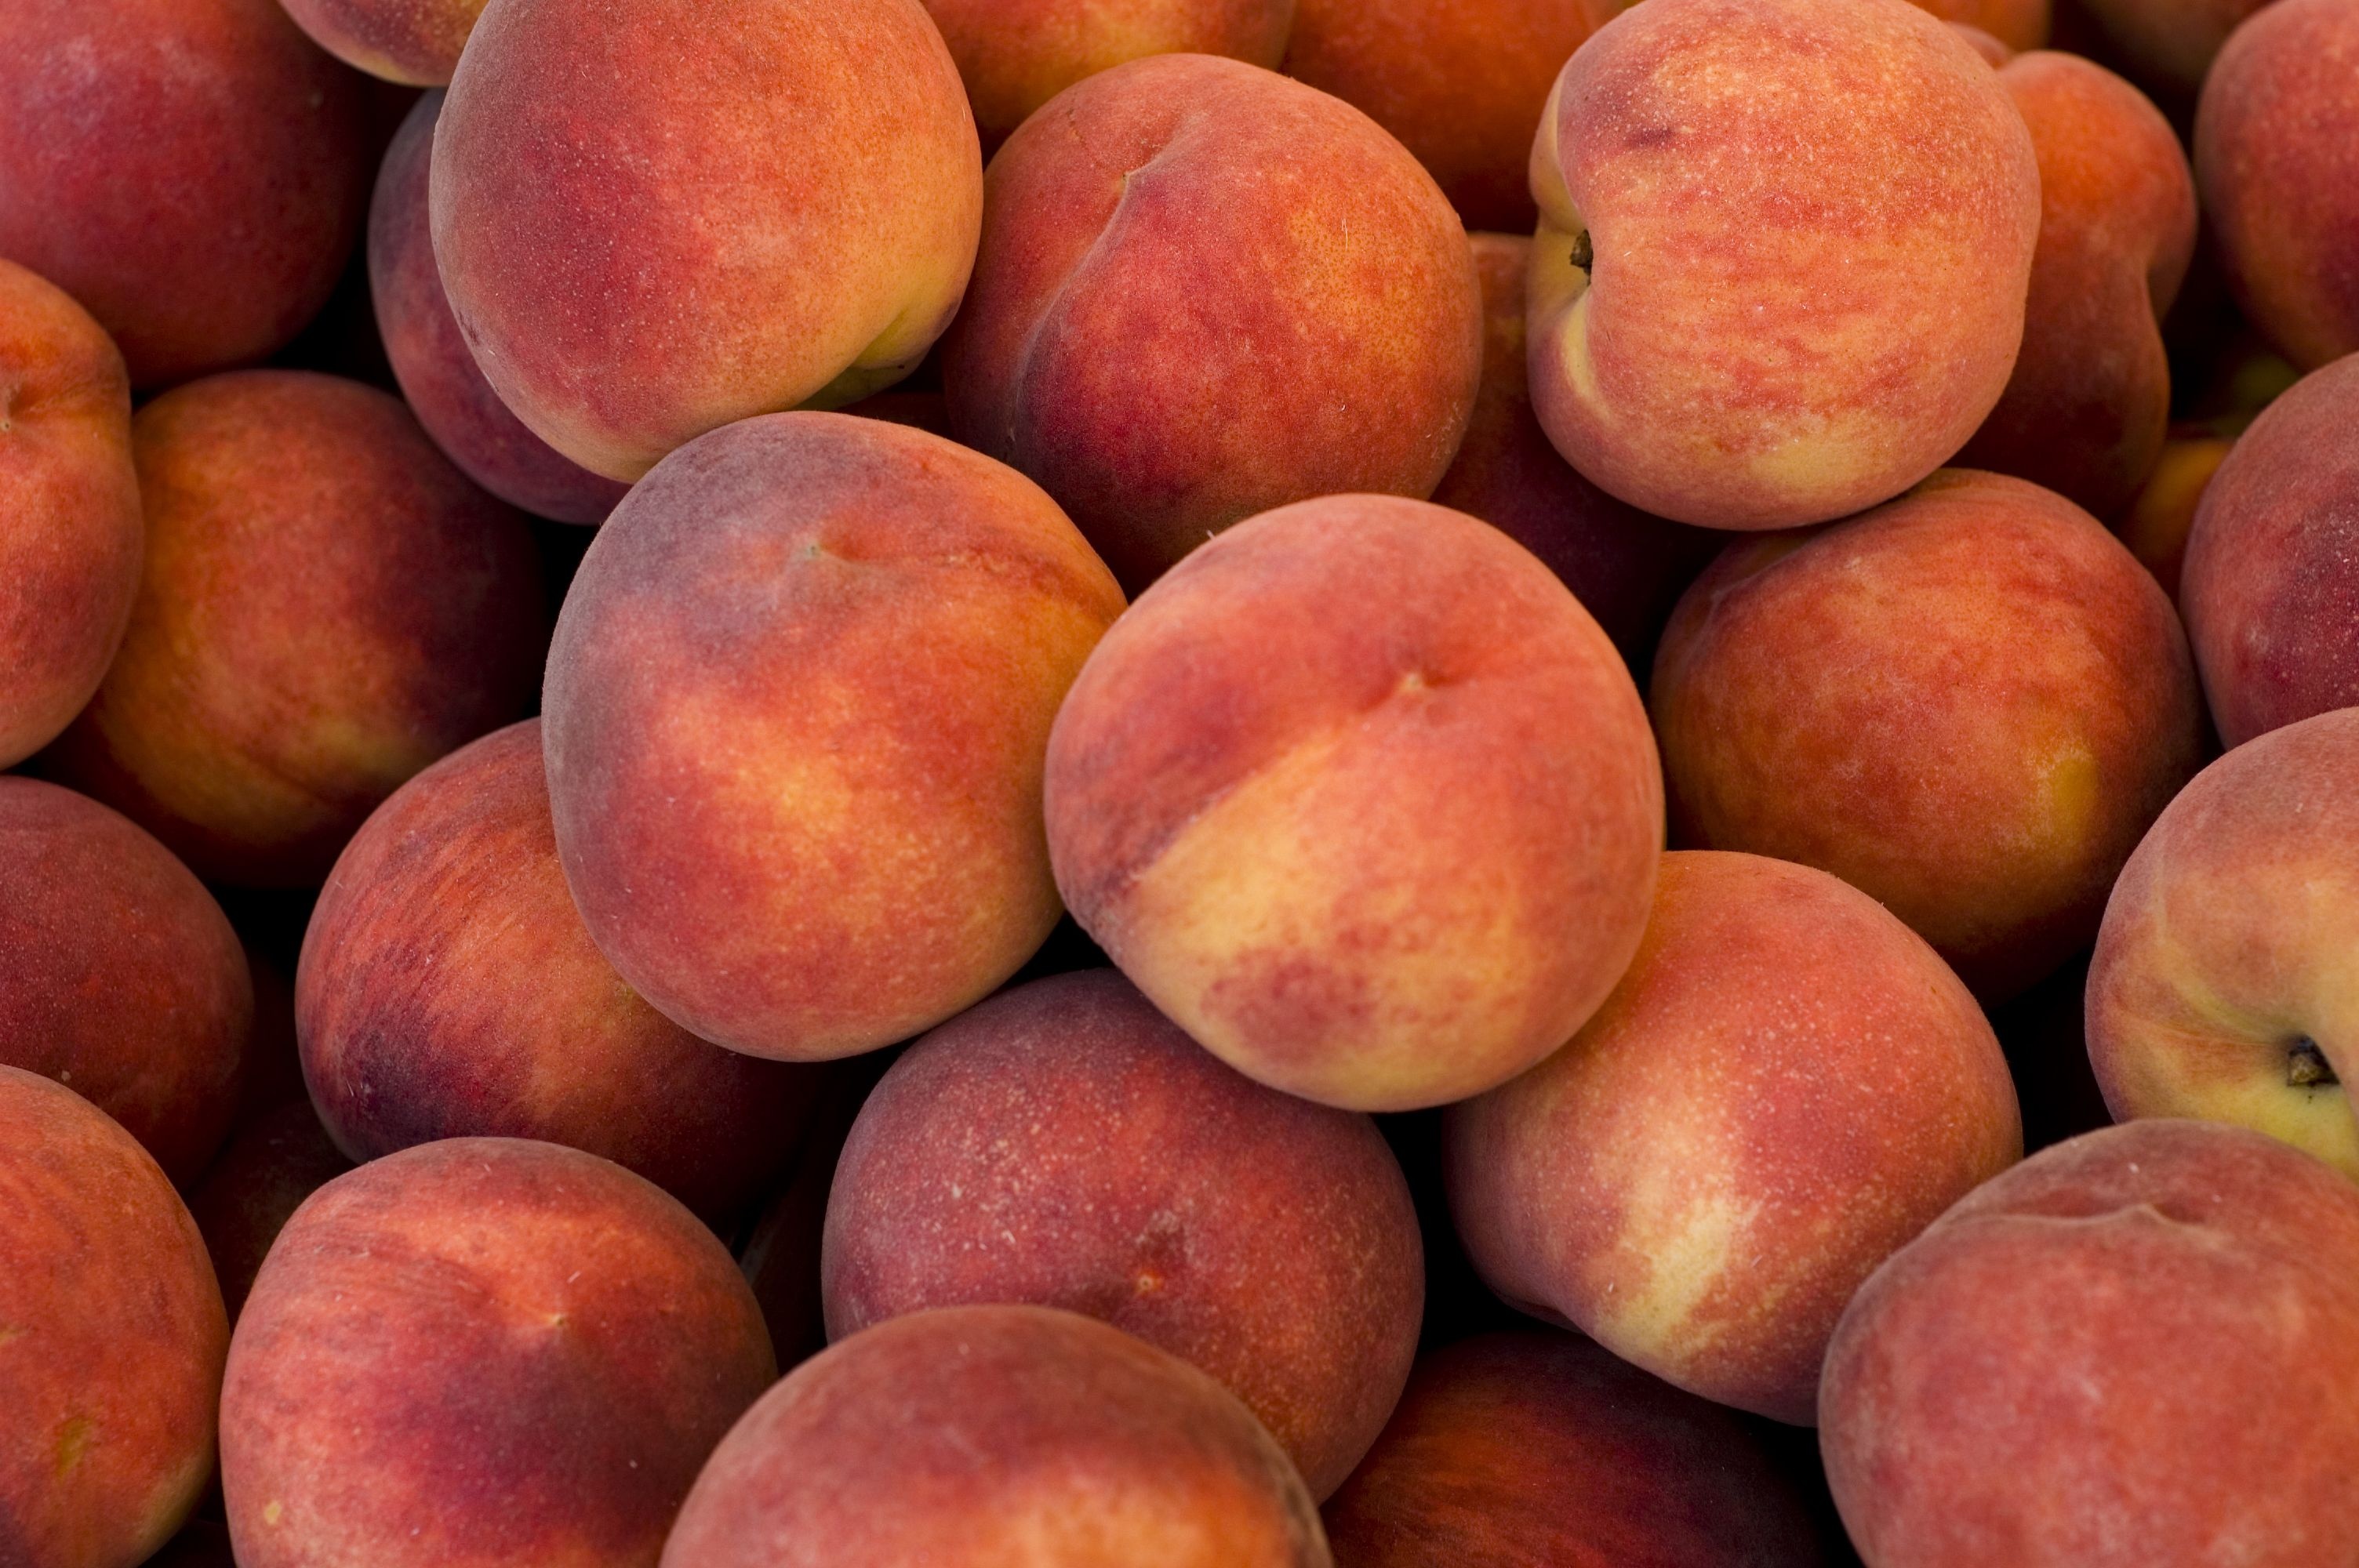 Peach: Considered drupes or stone fruit because their flesh surrounds a shell that houses an edible seed. 3010x2000 HD Wallpaper.